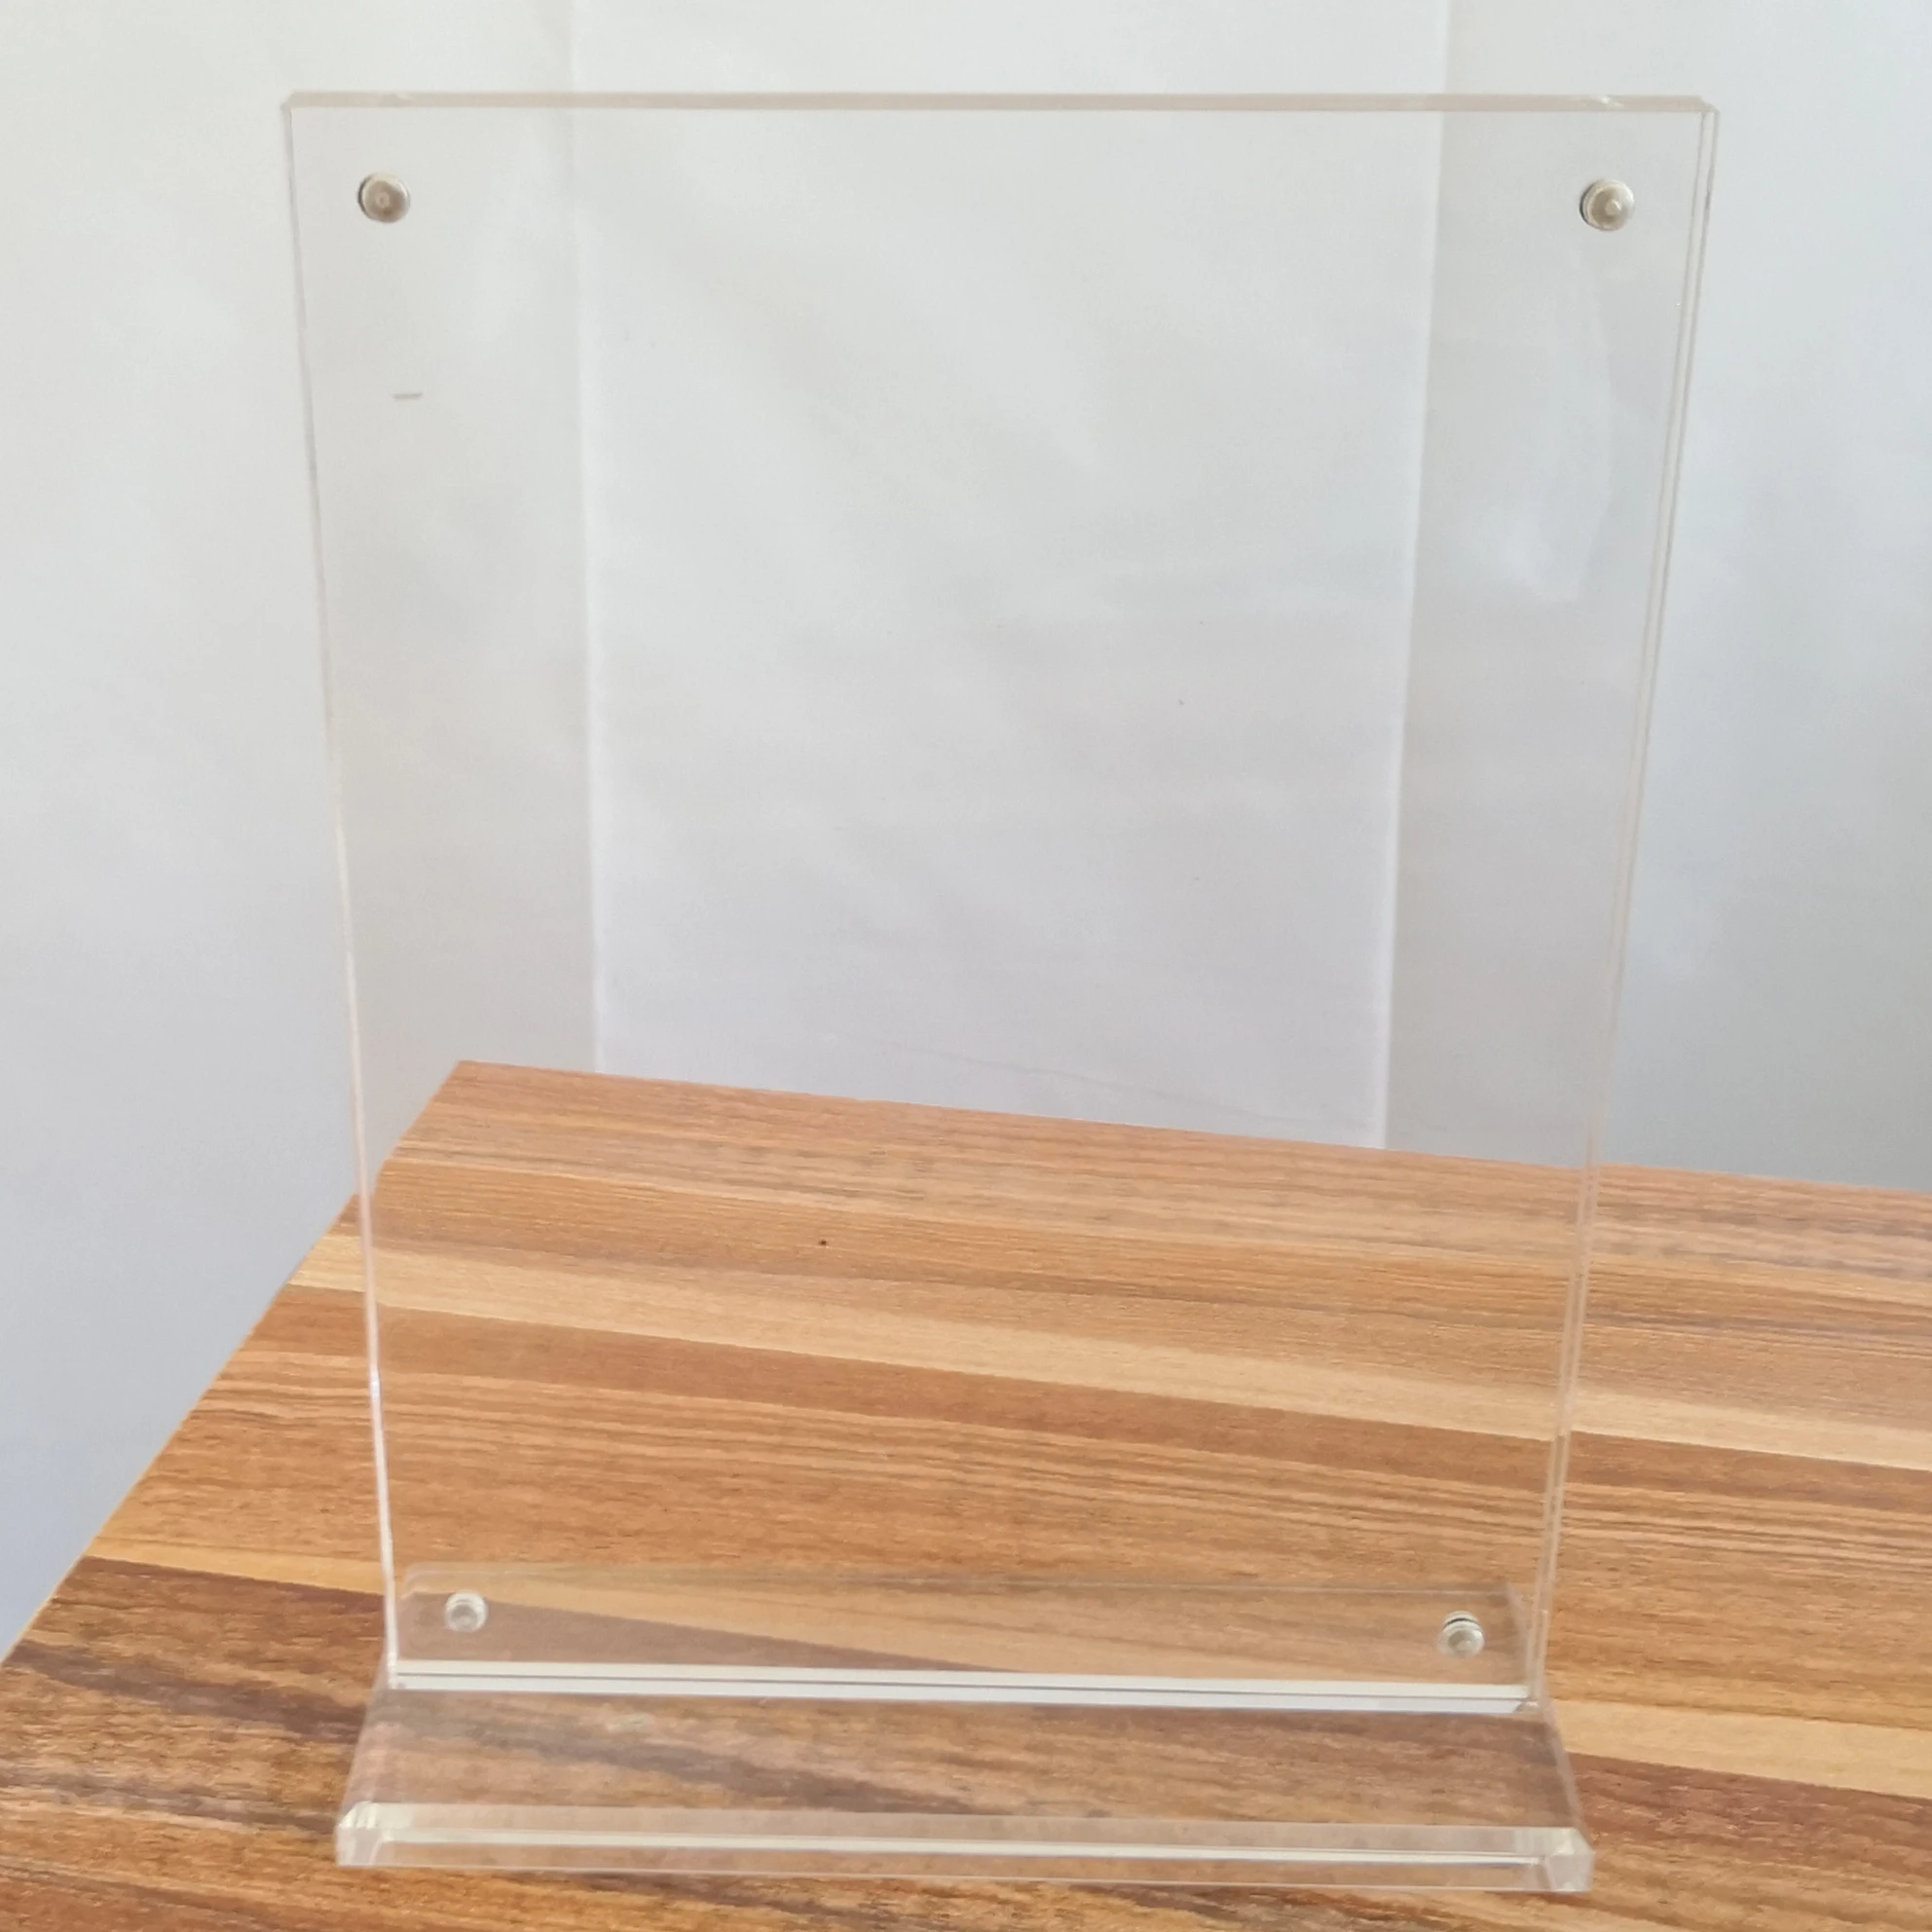 wholesale high quality clipboard t shape table stand menu holder with base